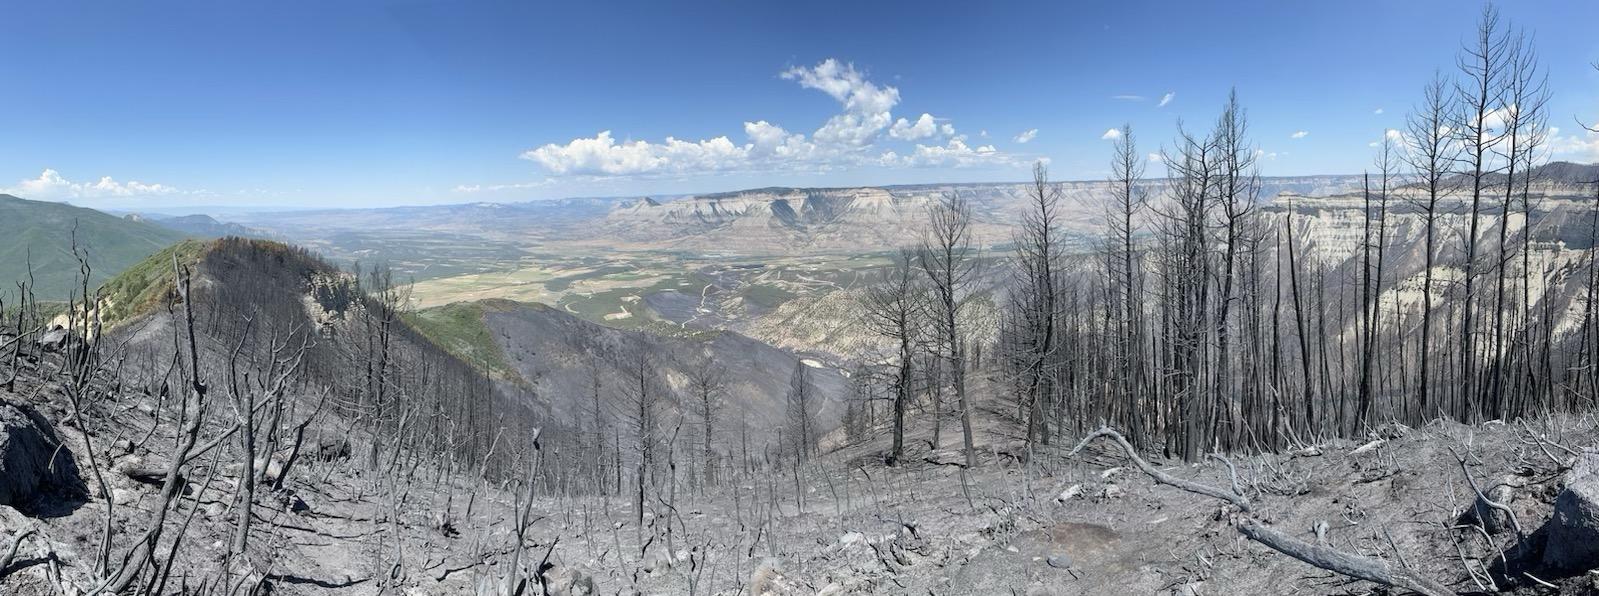 burned mountainside on southern end of the incident